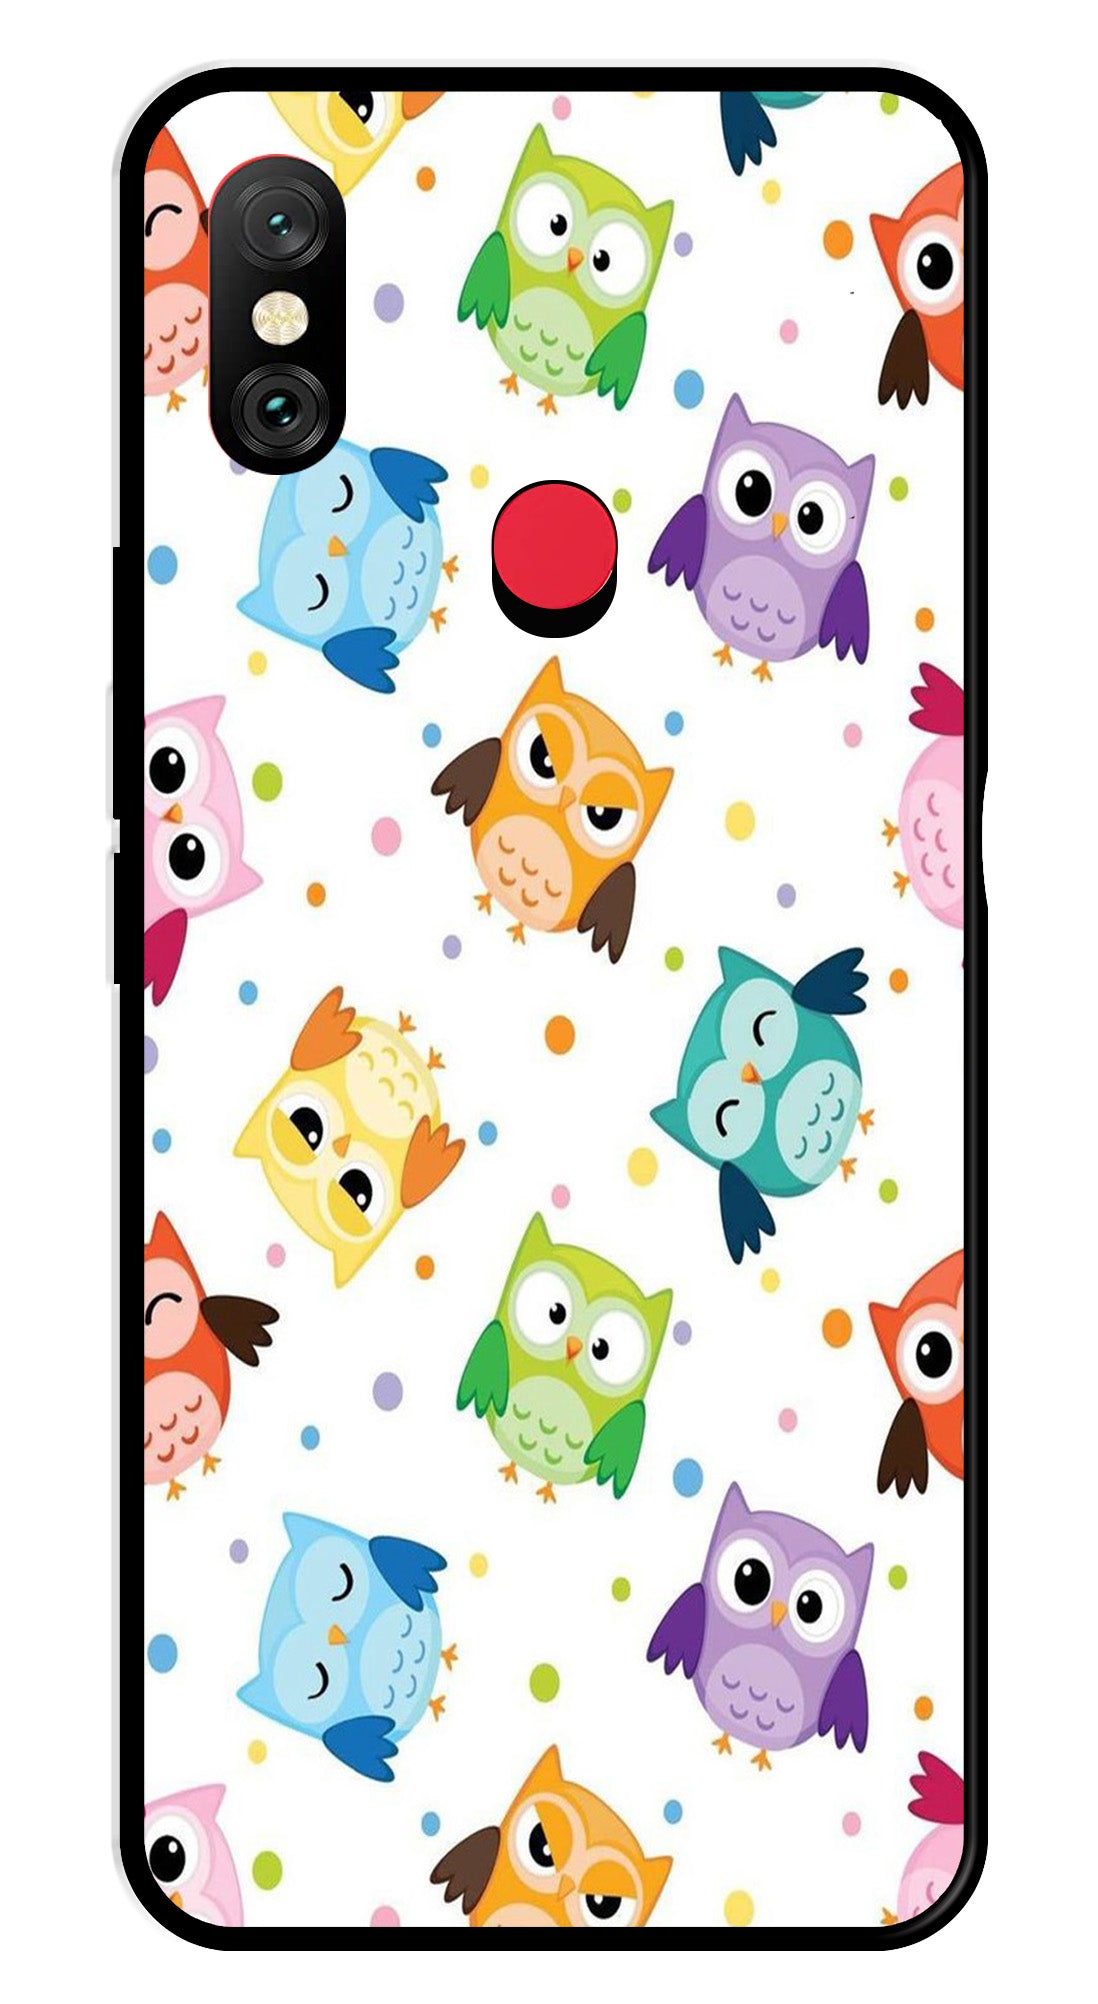 Owls Pattern Metal Mobile Case for Redmi Note 6   (Design No -20)